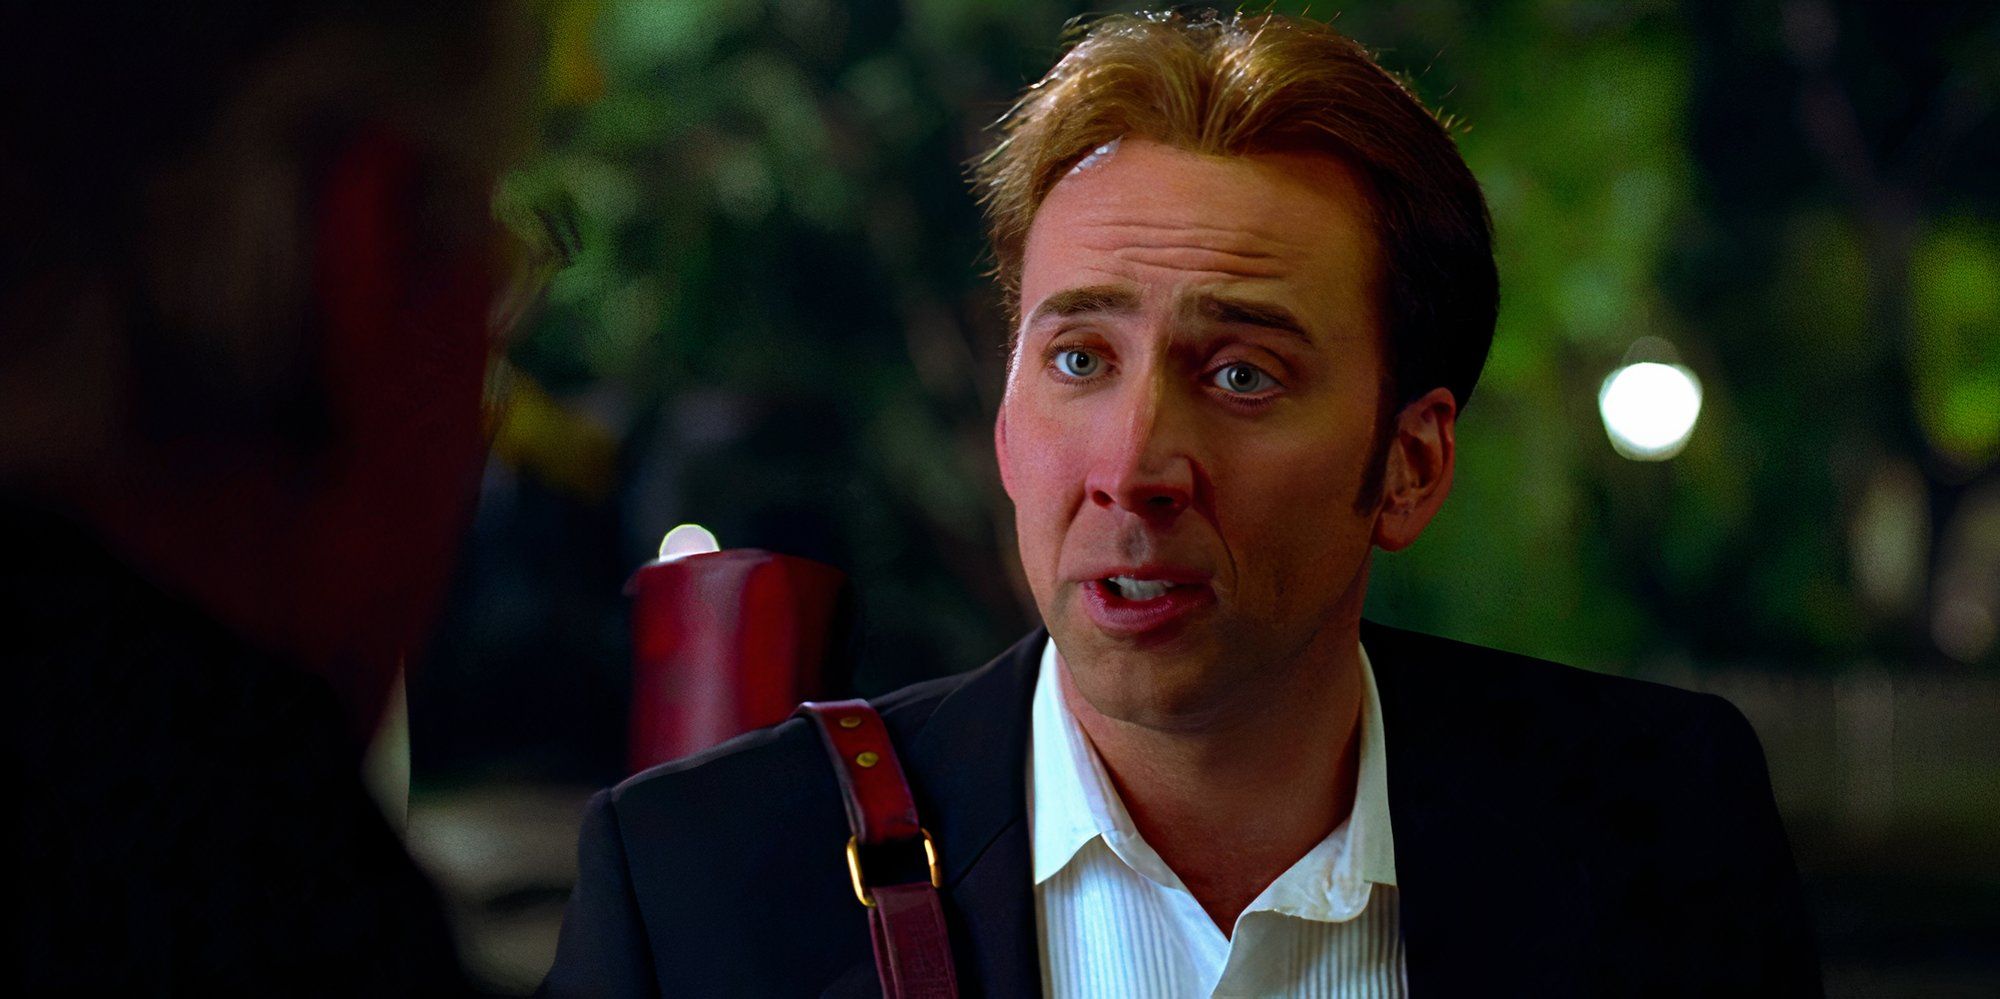 Nicolas Cage engages in conversation in a scene from National Treasure